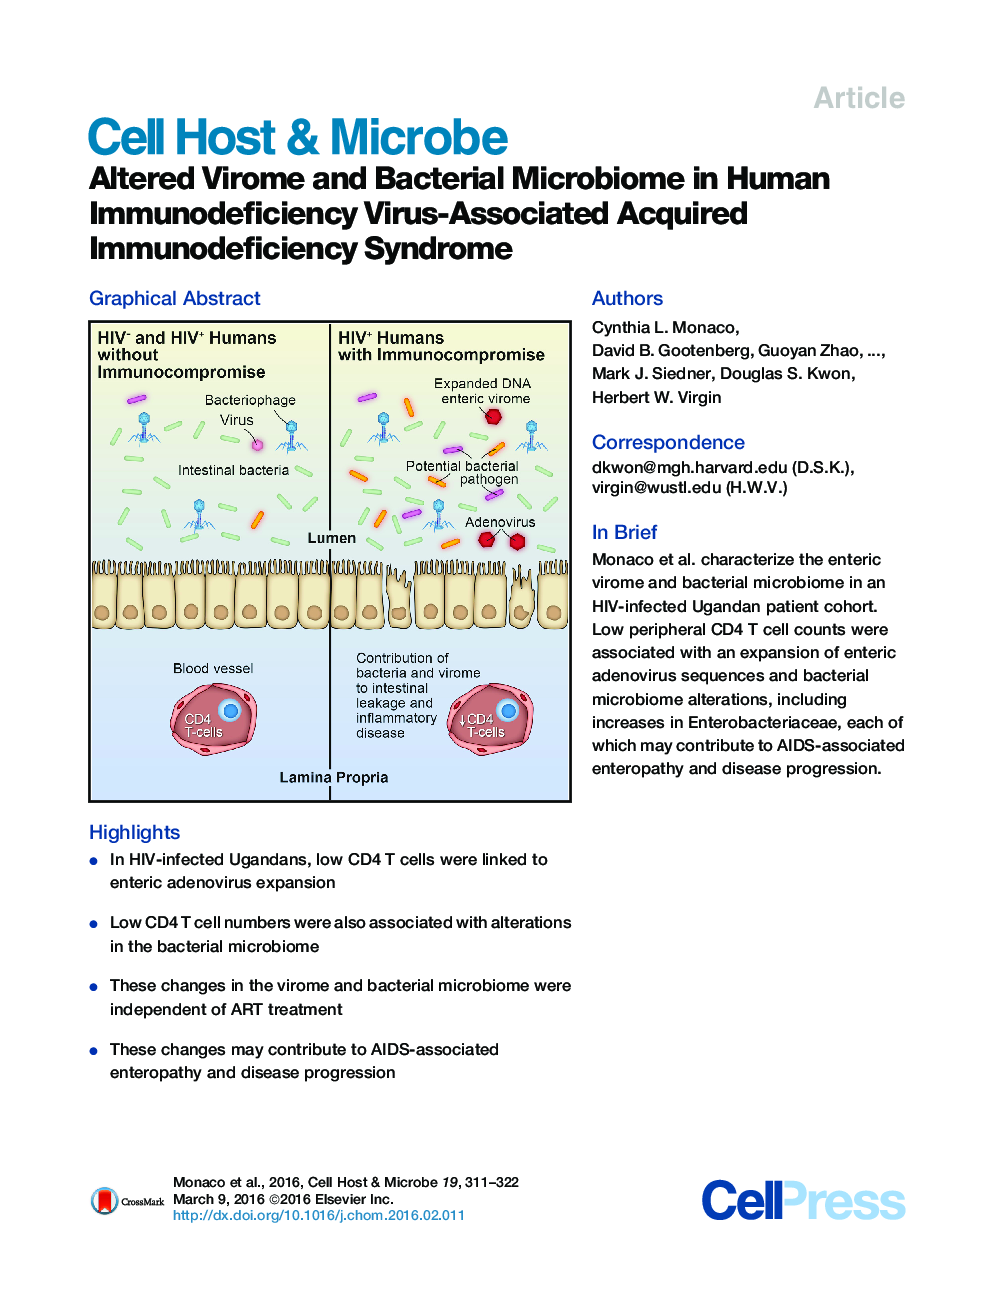 Altered Virome and Bacterial Microbiome in Human Immunodeficiency Virus-Associated Acquired Immunodeficiency Syndrome